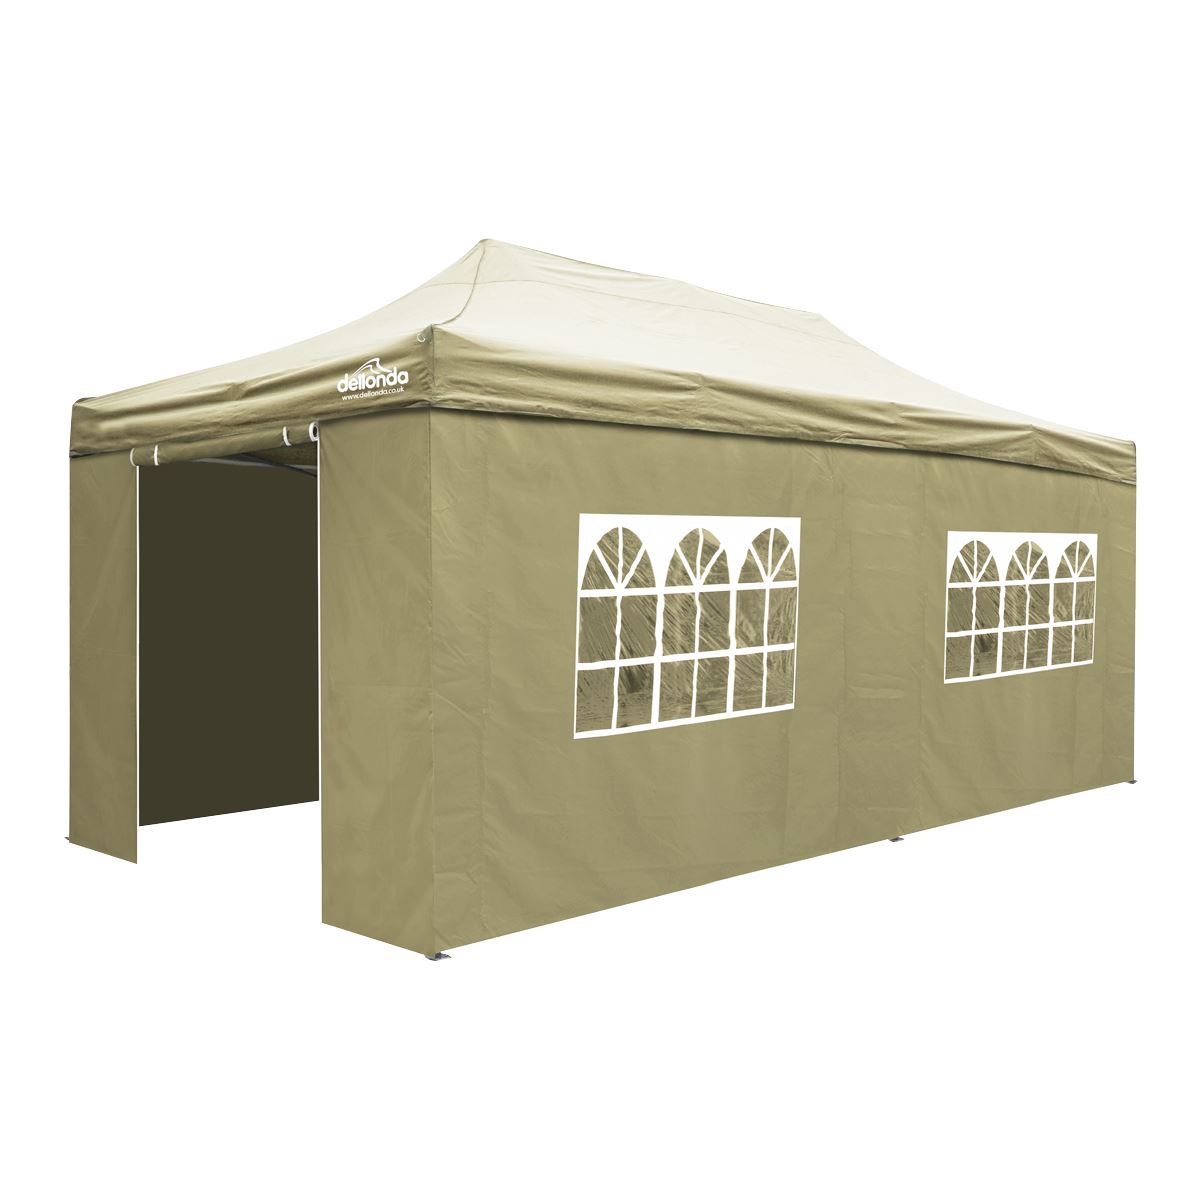 Dellonda Premium 3x6m Pop-Up Gazebo & Side Walls, PVC Coated, Water Resistant Fabric with Carry Bag, Rope, Stakes & Weight Bags - Beige